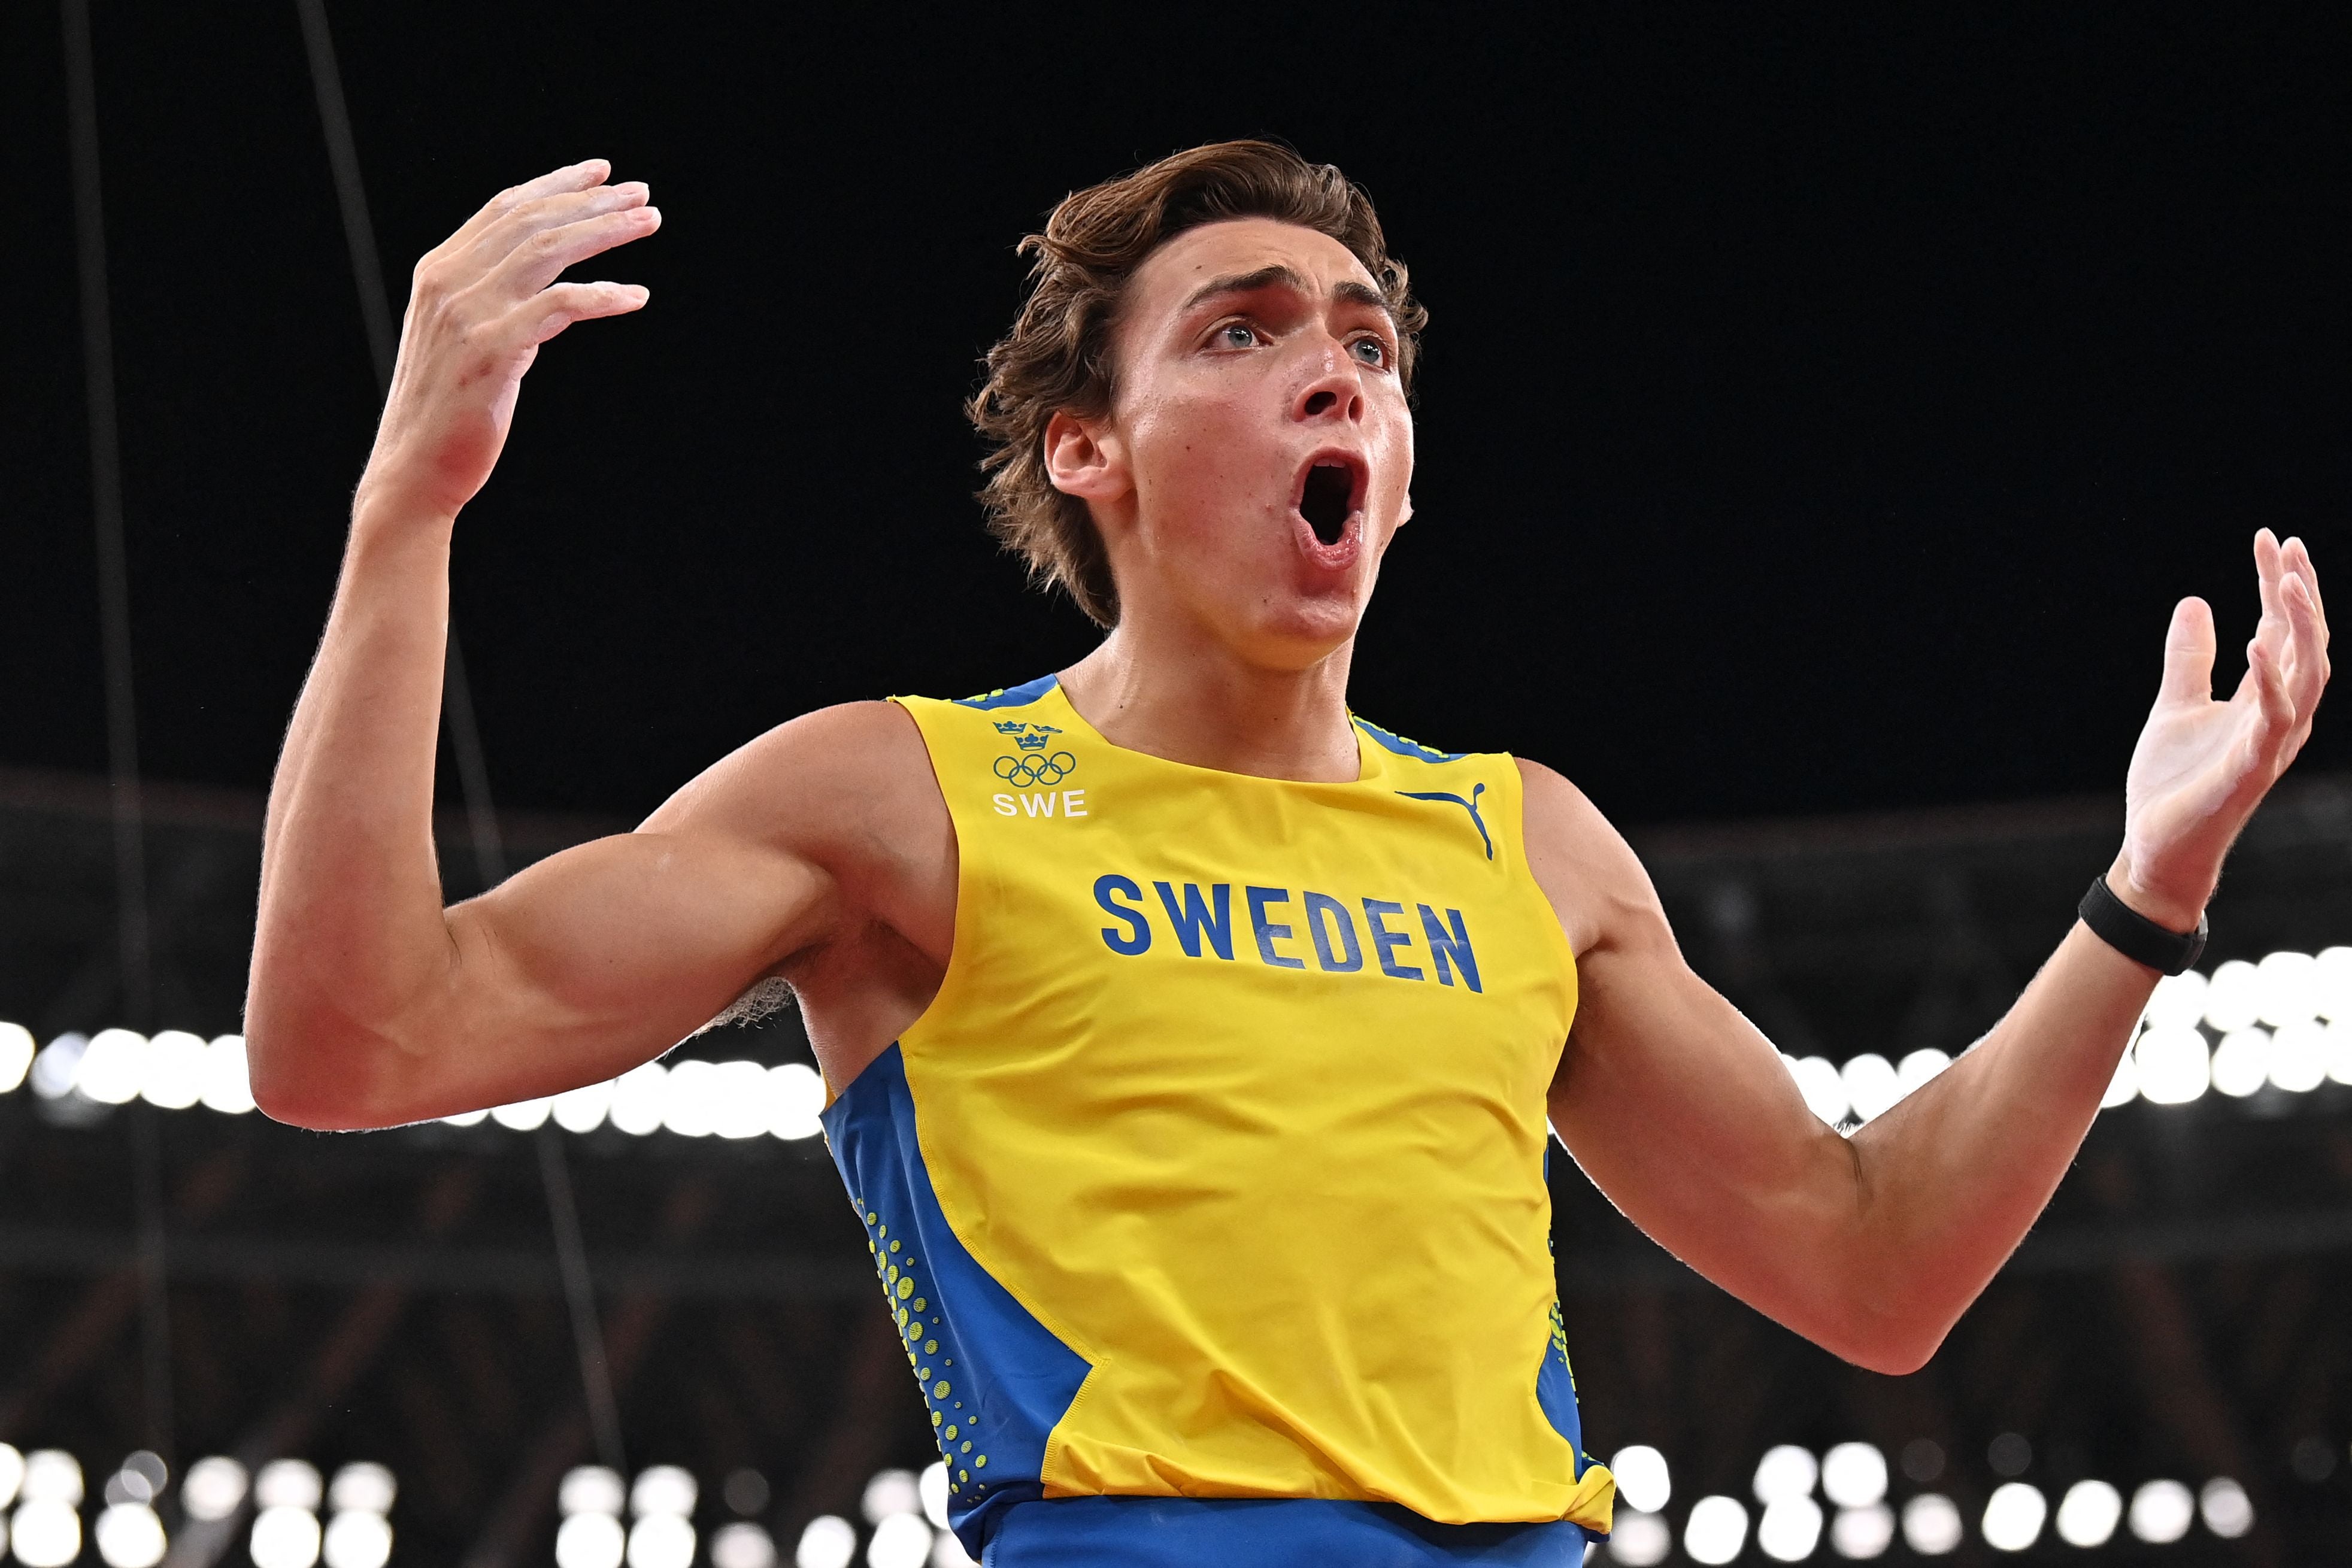 Sweden's Armand Duplantis celebrates after clearing the bar to attempt the gold medal as he competes in the men's pole vault final during the Tokyo 2020 Olympic Games at the Olympic Stadium in Tokyo on August 3, 2021